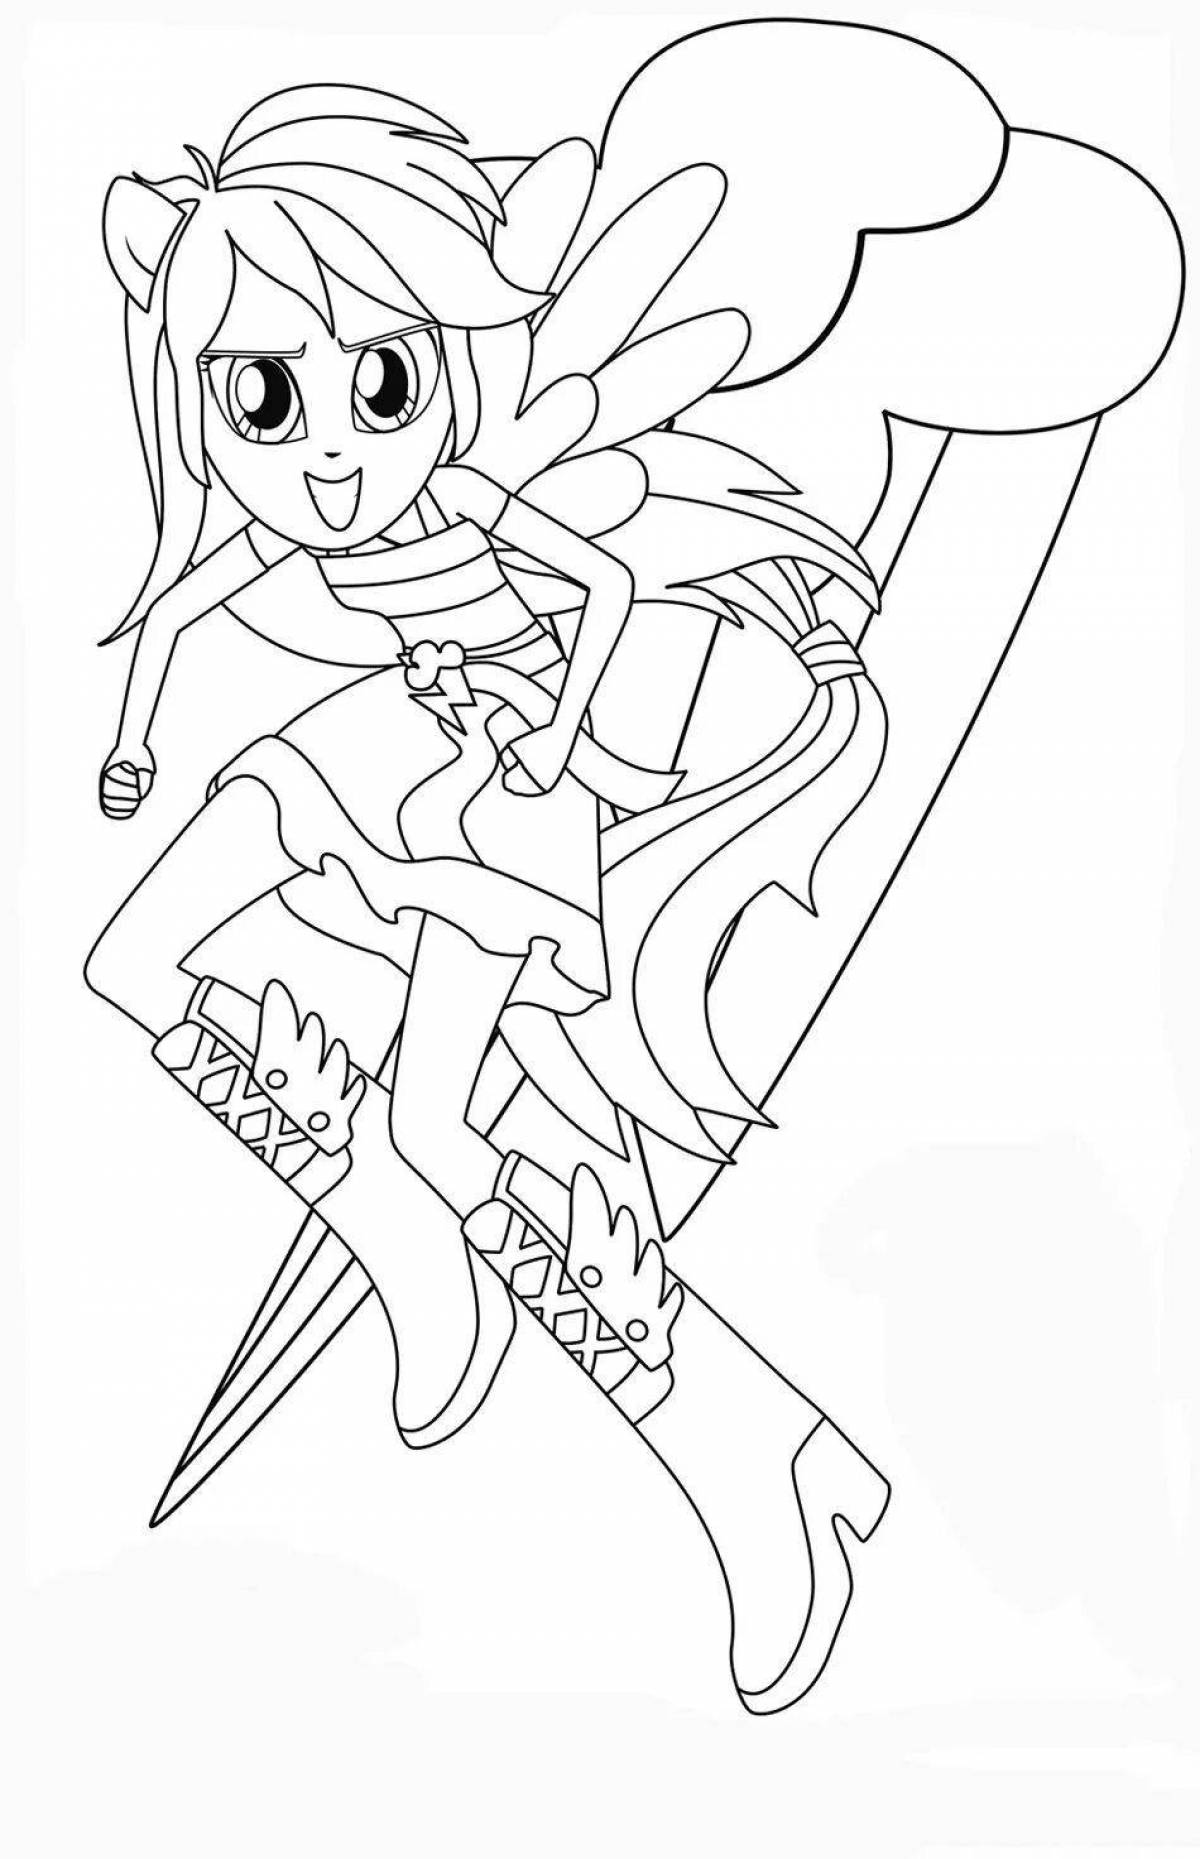 Coloring page nice equestria girls